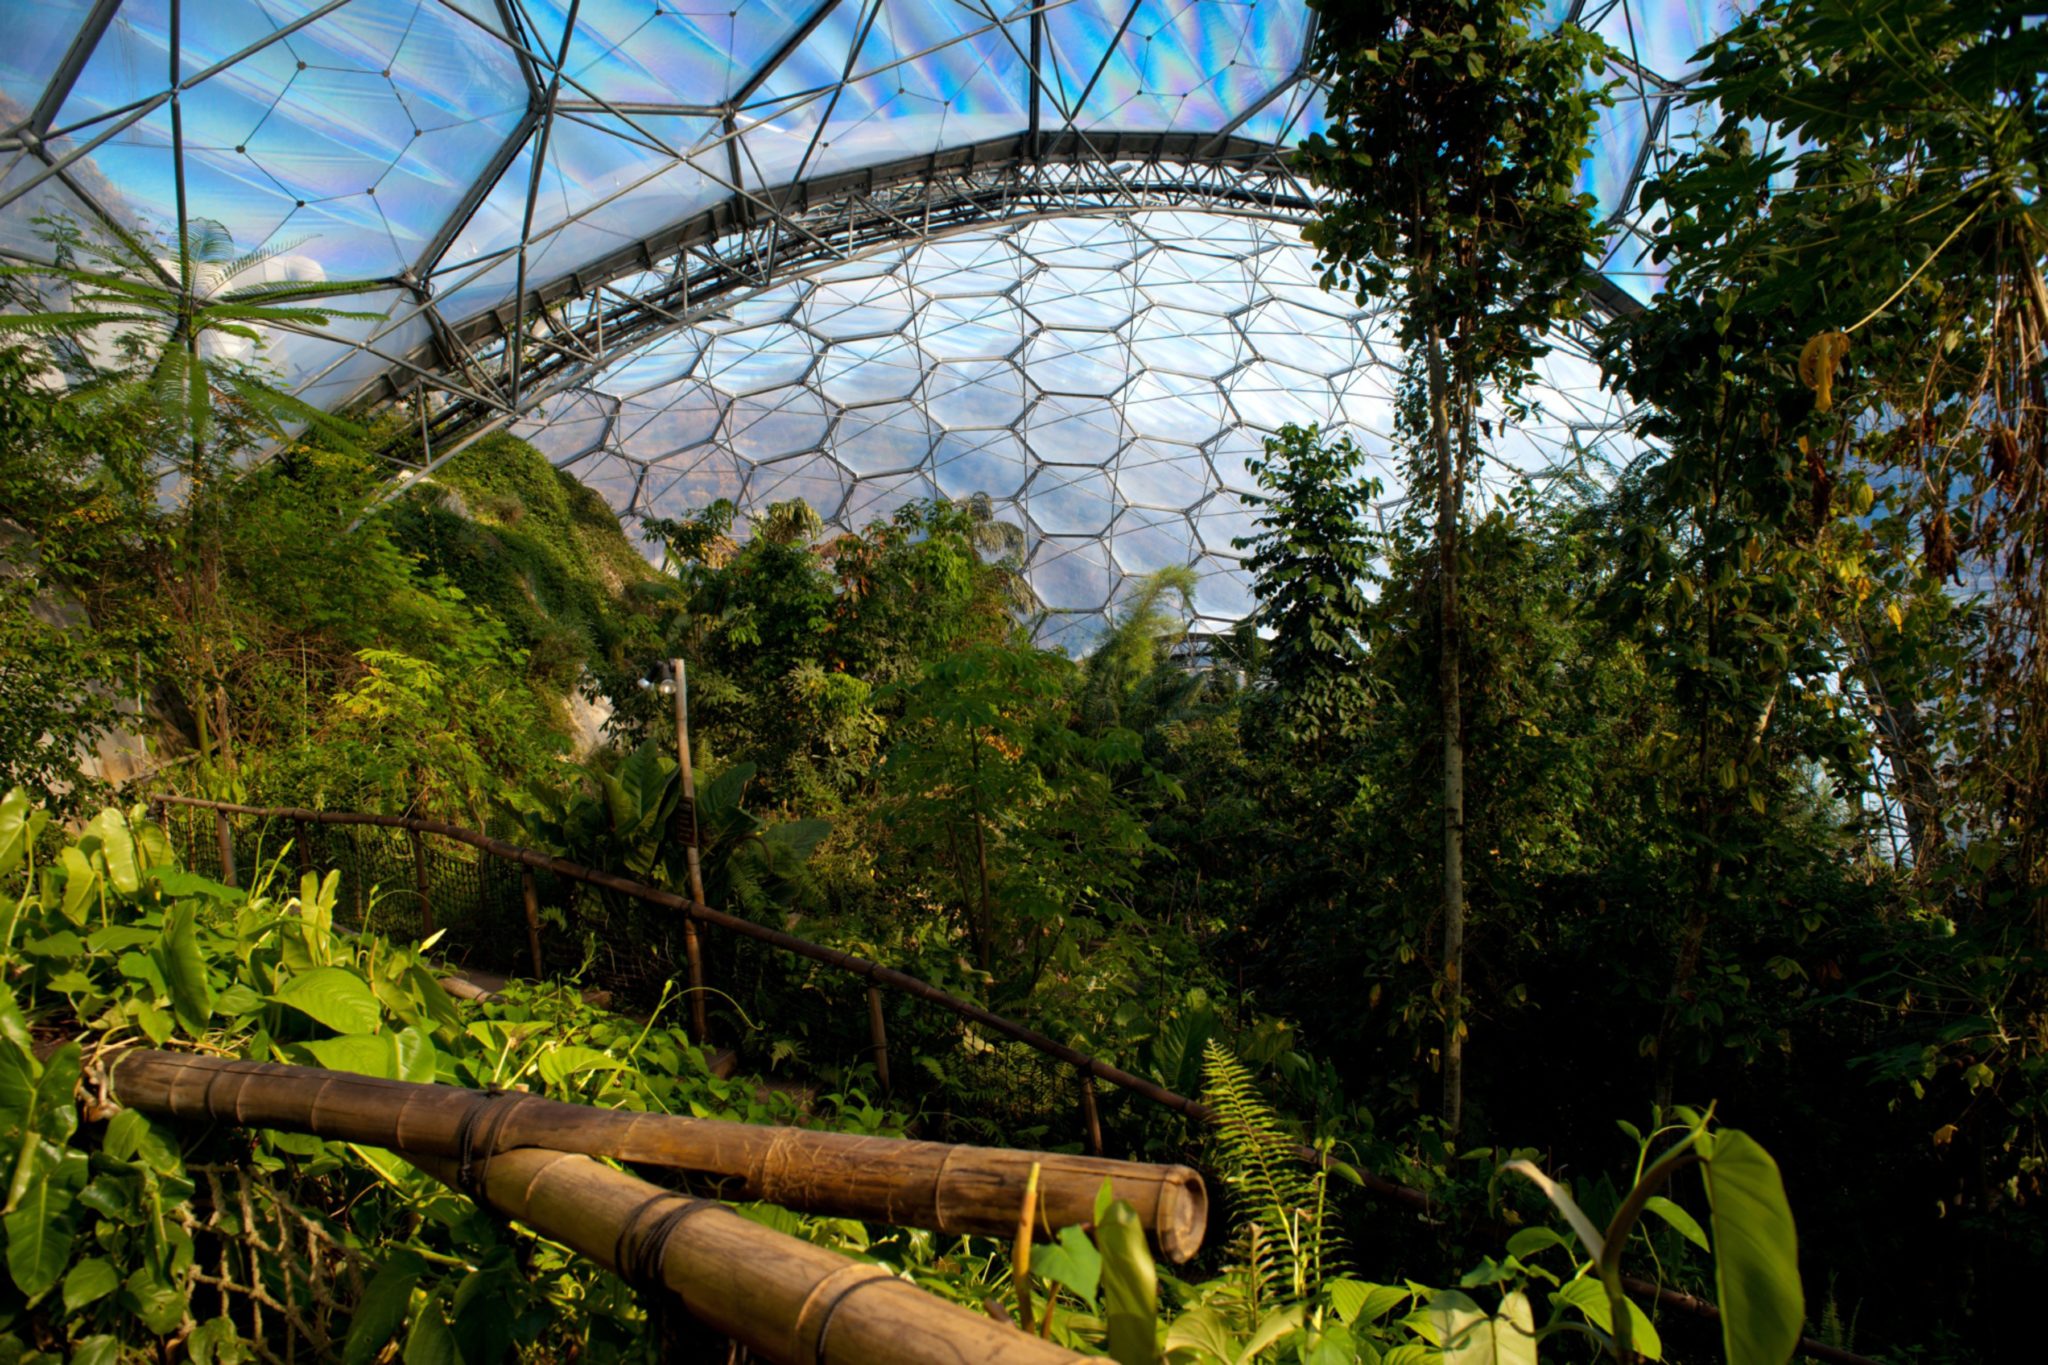 The Eden Project: Oasis, Amy Winehouse and Paolo Nutini have all